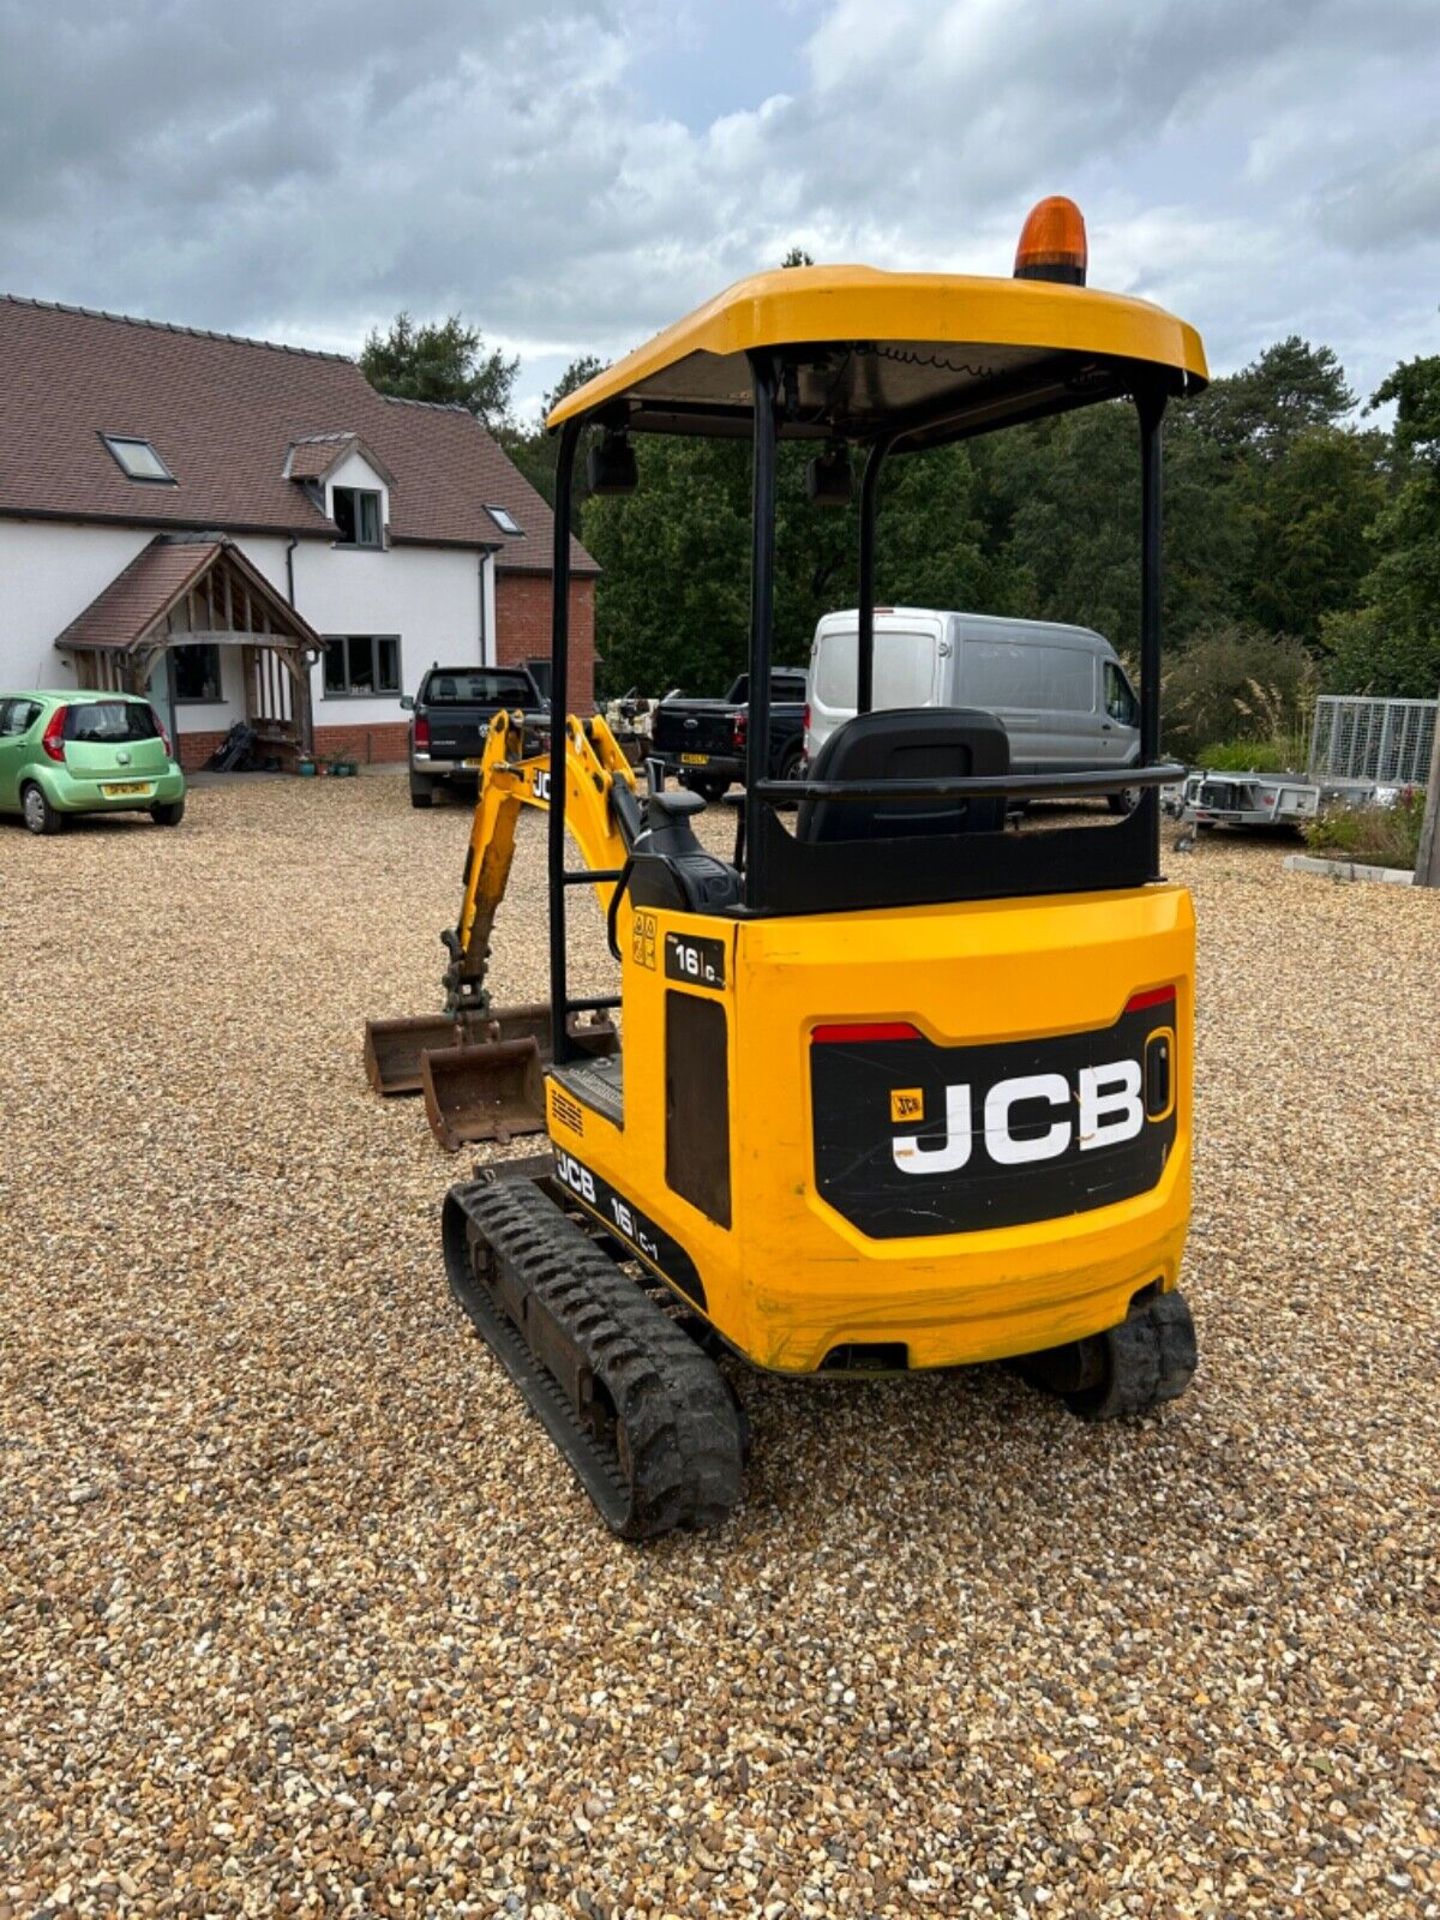 2020 JCB 16C: CHOICE OF HIGH-QUALITY MODERN DIGGER - Image 3 of 12